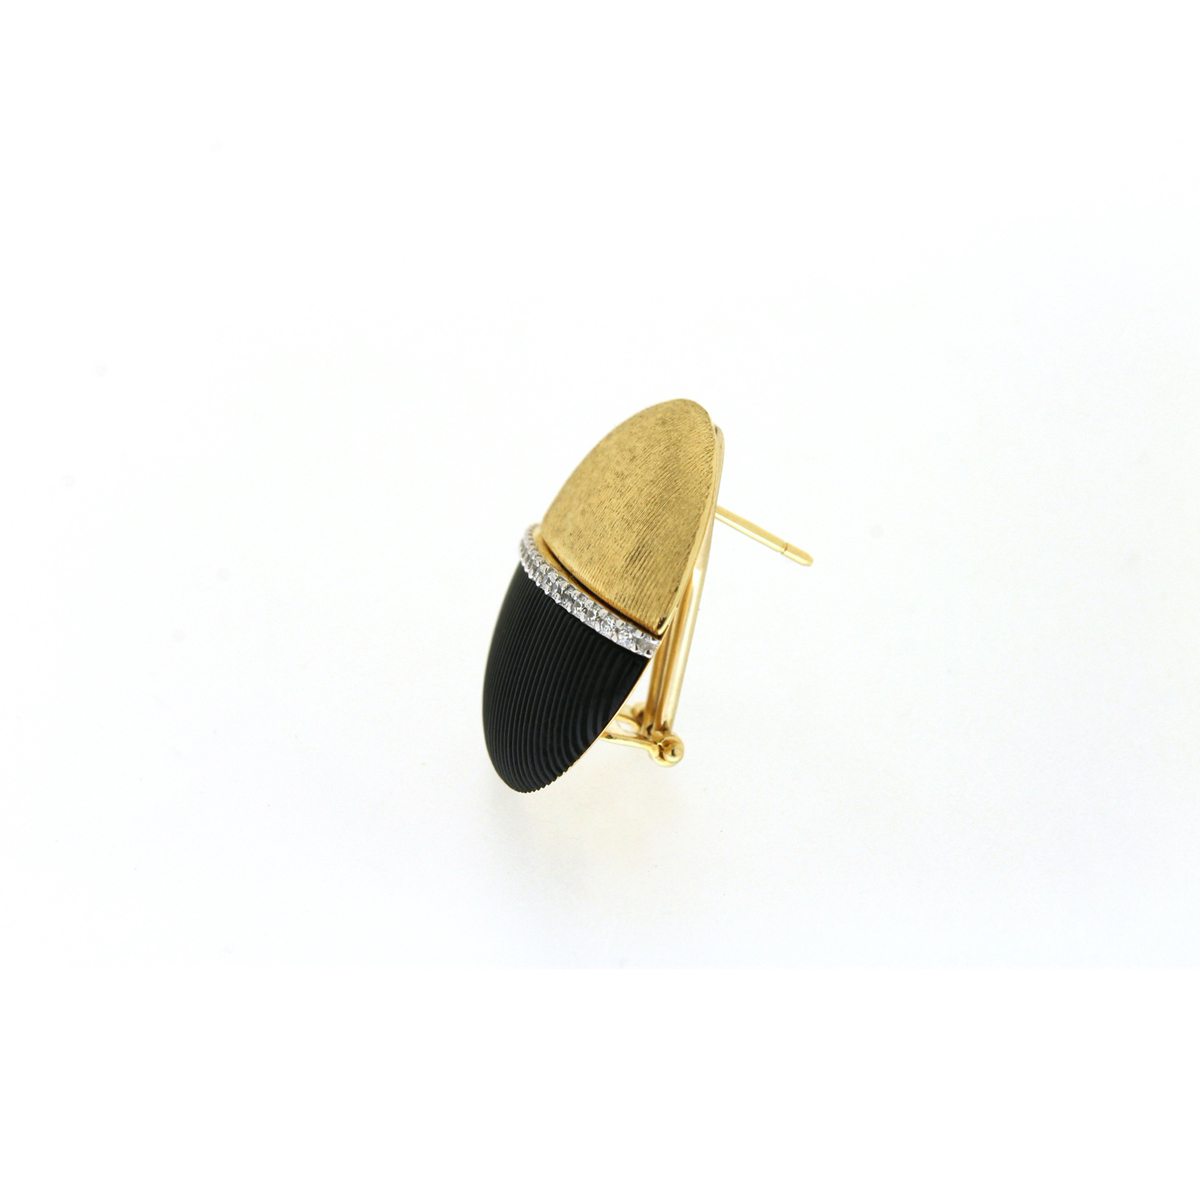 Black and Gold Stud Earrings with Diamonds